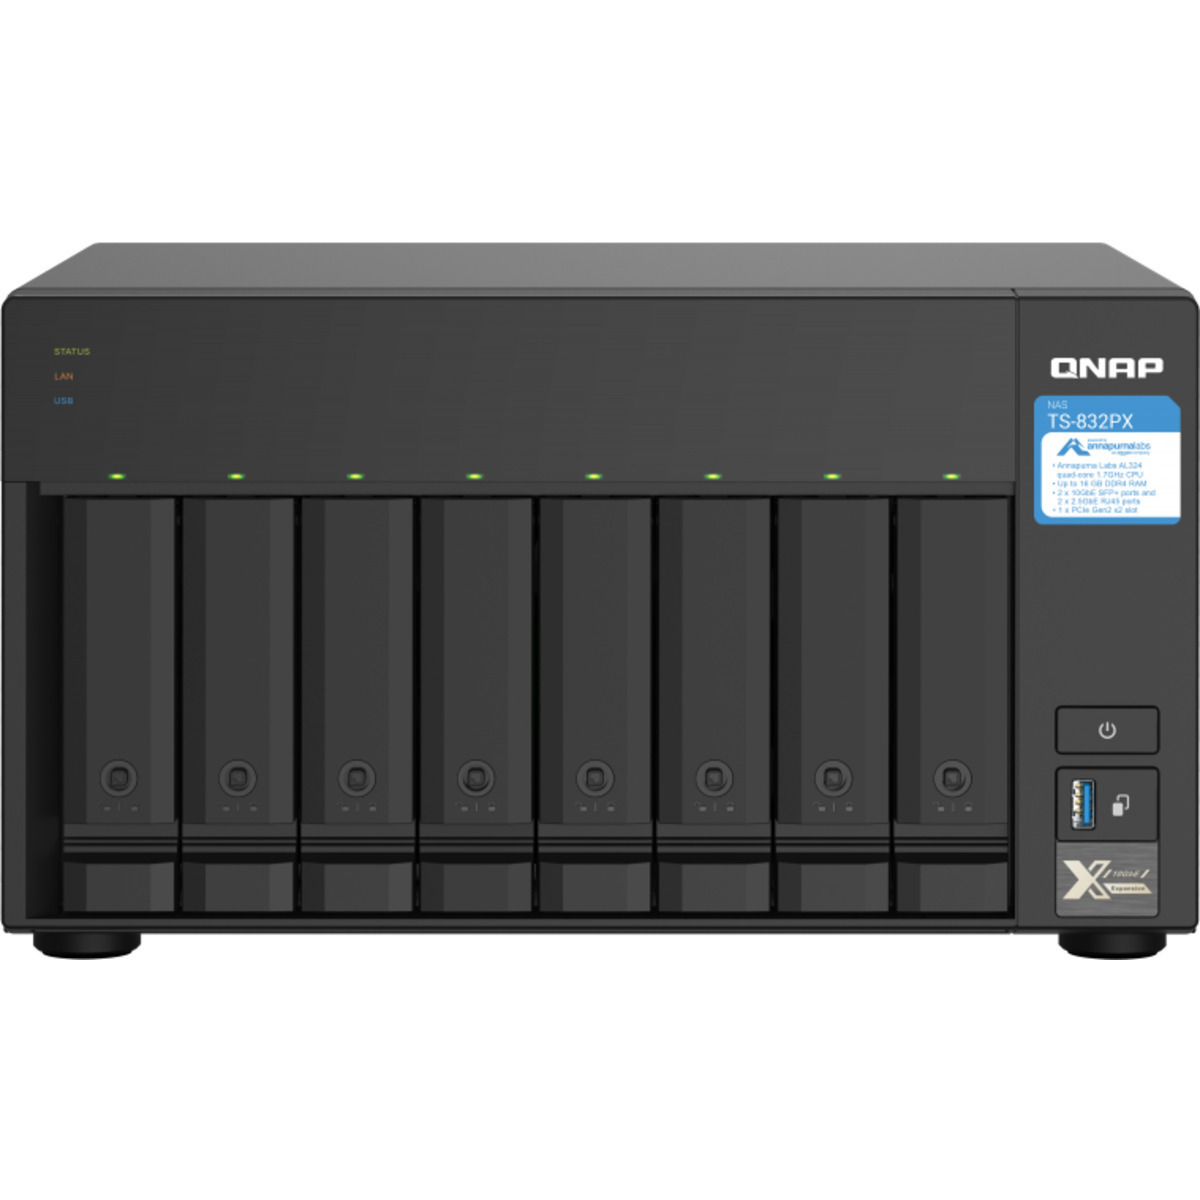 QNAP TS-832PX 70tb 8-Bay Desktop Multimedia / Power User / Business NAS - Network Attached Storage Device 7x10tb Seagate IronWolf Pro ST10000NT001 3.5 7200rpm SATA 6Gb/s HDD NAS Class Drives Installed - Burn-In Tested - ON SALE - FREE RAM UPGRADE TS-832PX